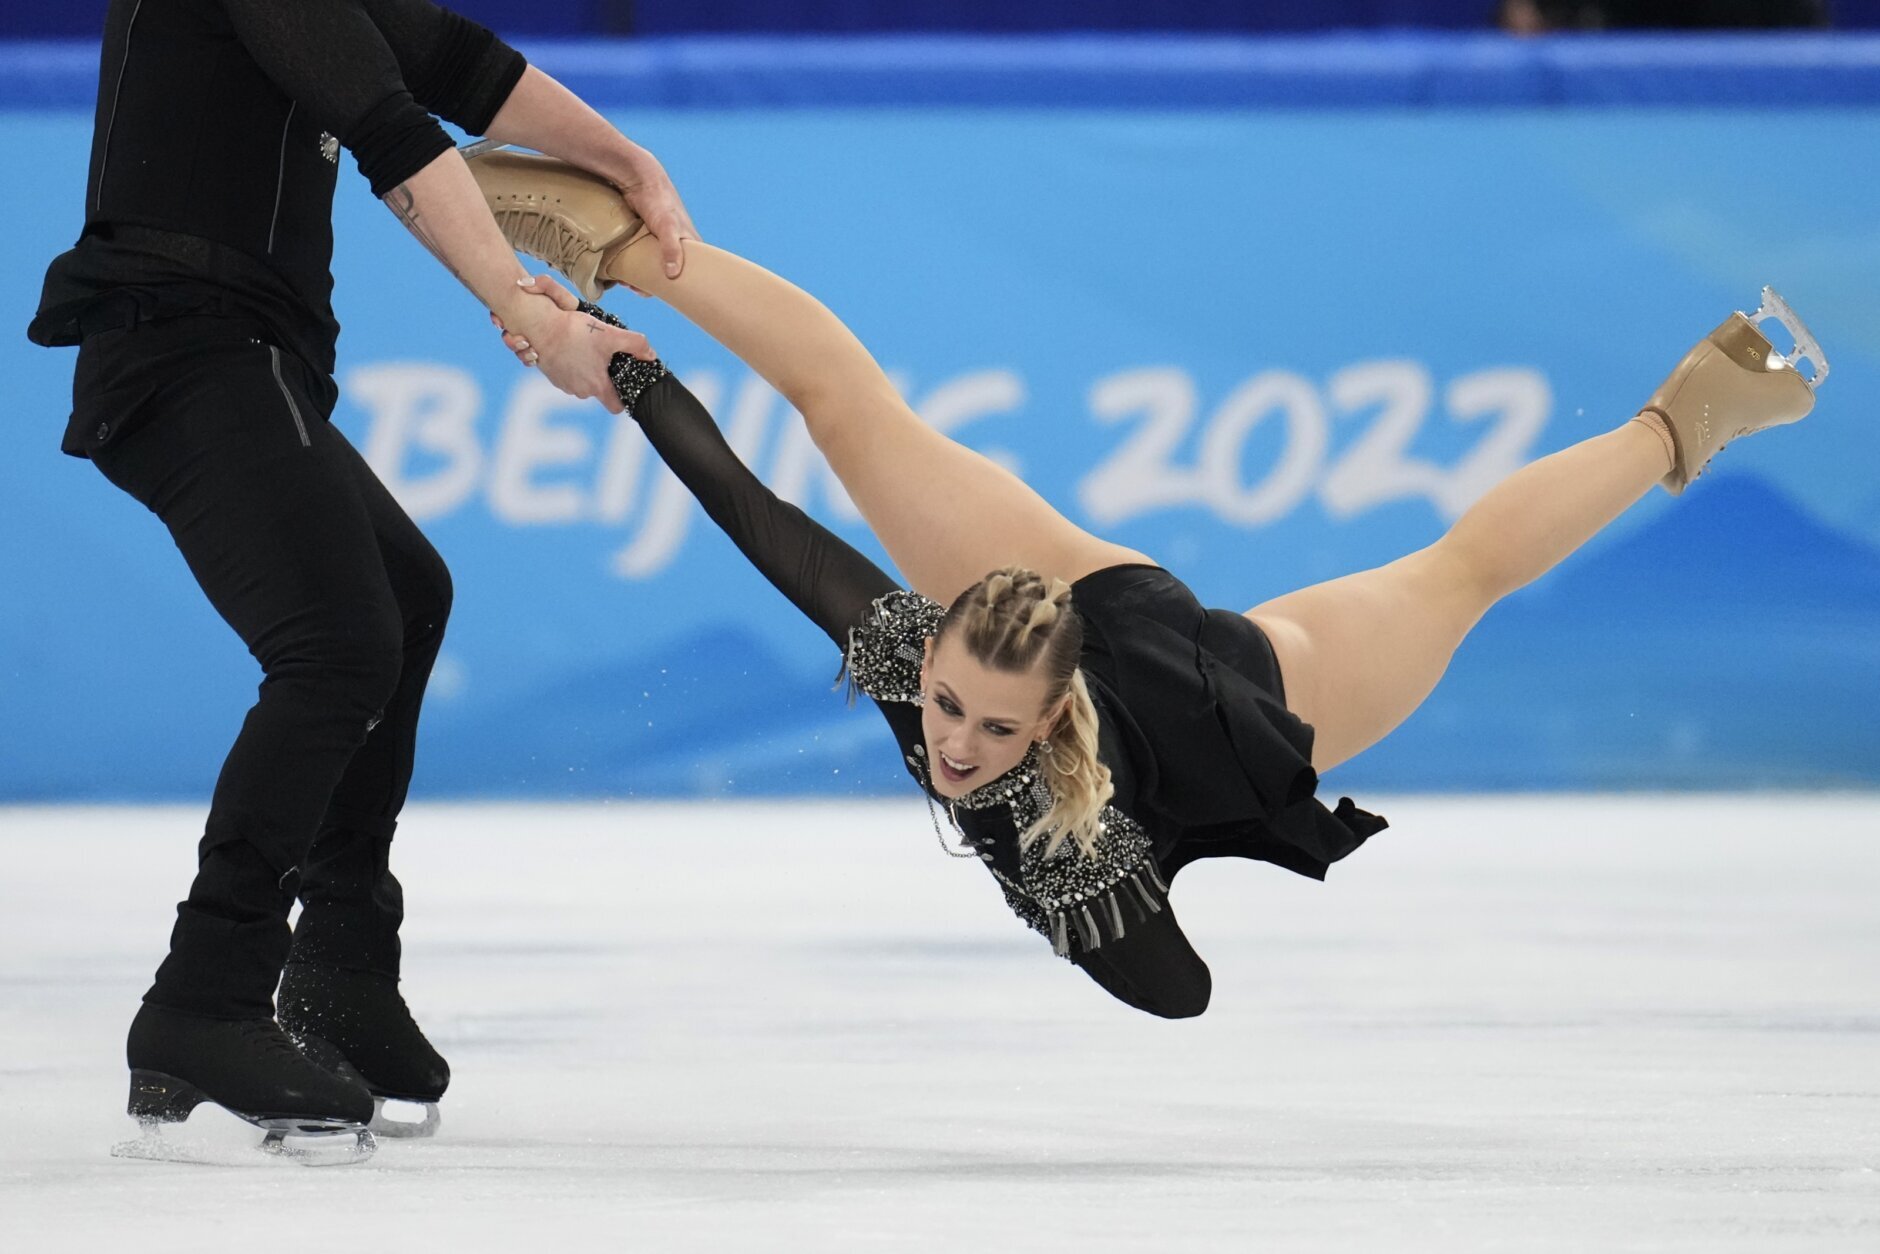 <p>Madison Hubbell and Zachary Donohue, of the United States, perform their routine in the ice dance competition during figure skating at the 2022 Winter Olympics, Saturday, Feb. 12, 2022, in Beijing.</p>
